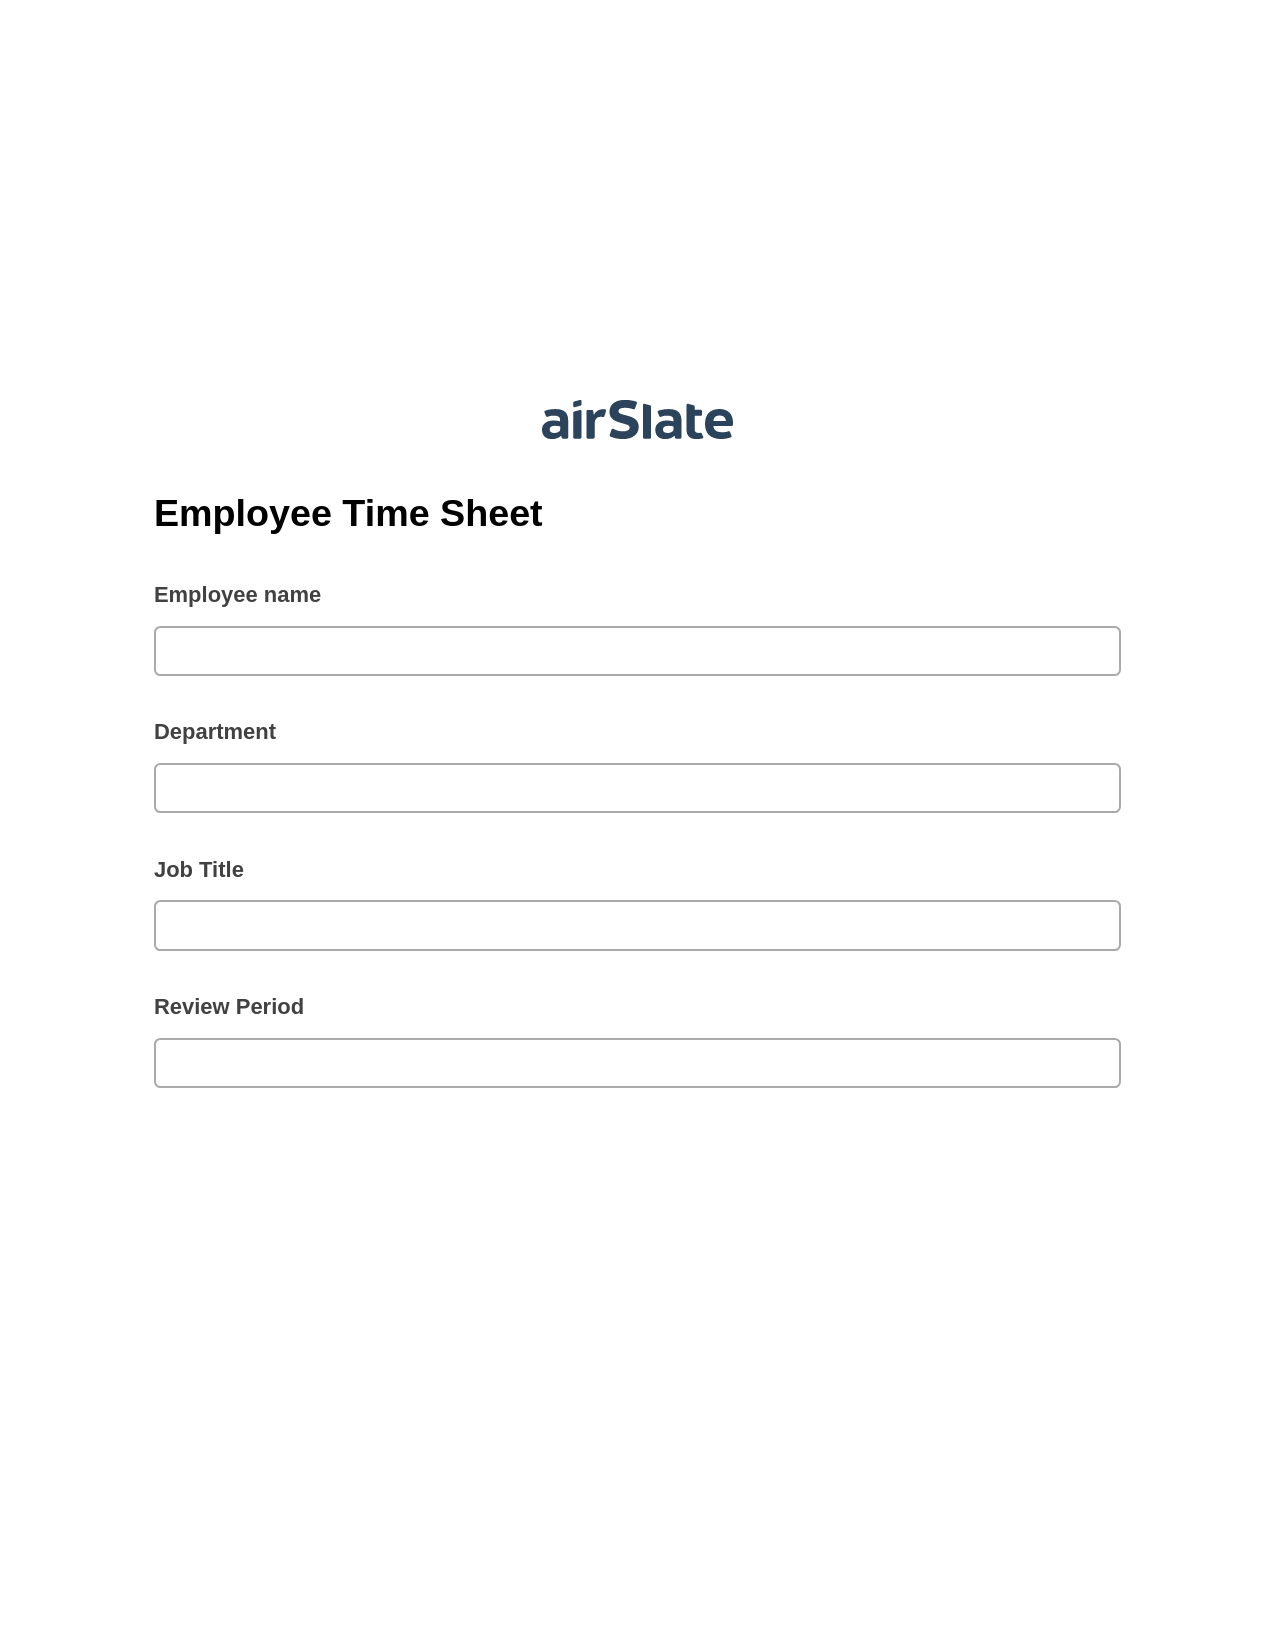 Multirole Employee Time Sheet Pre-fill from Office 365 Excel Bot, Create slate addon, Archive to Google Drive Bot